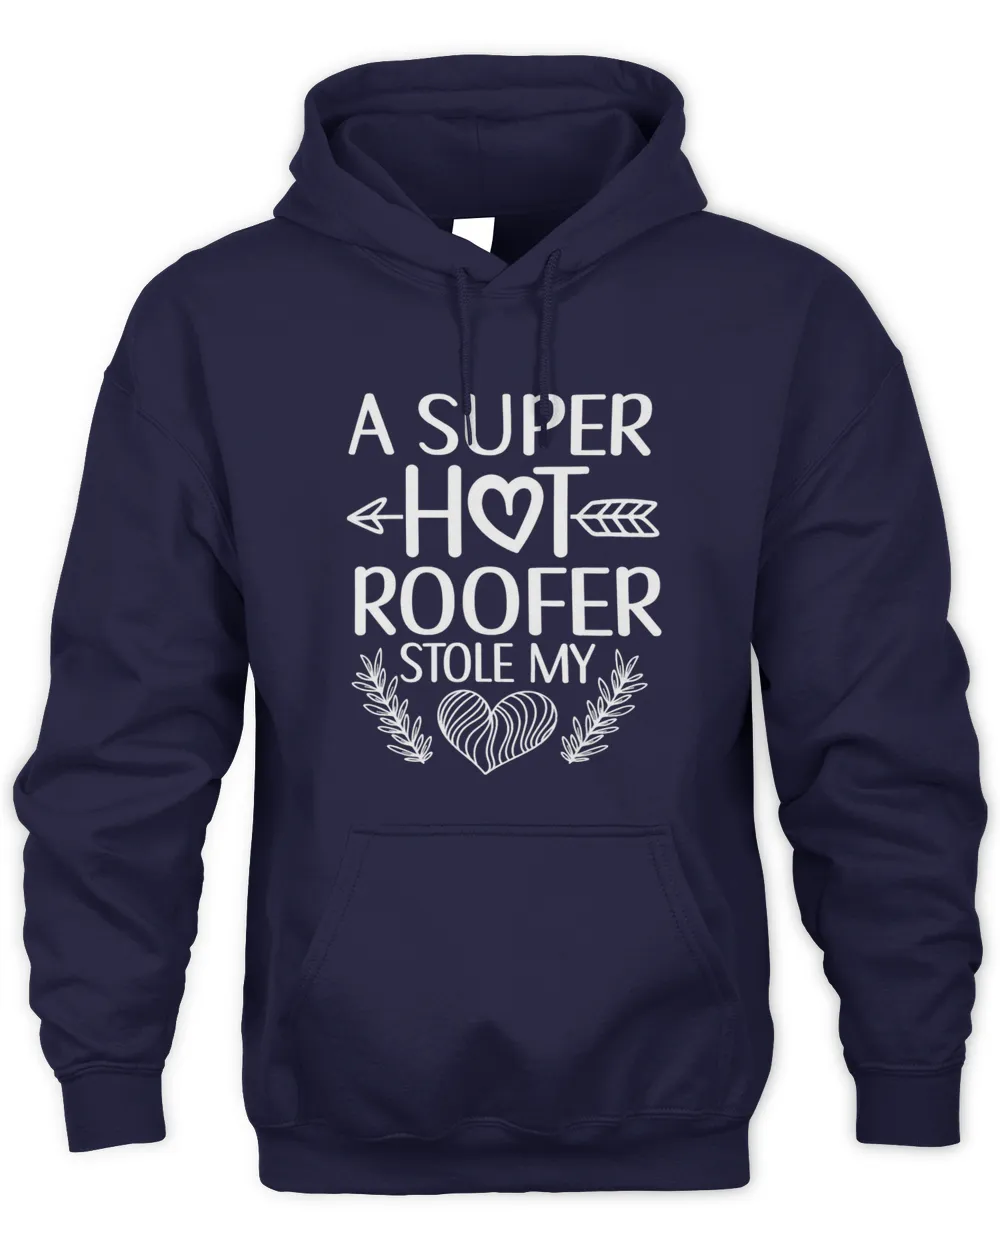 Roofer Girlfriend Roofing Im A Roofer Roofer Wife2